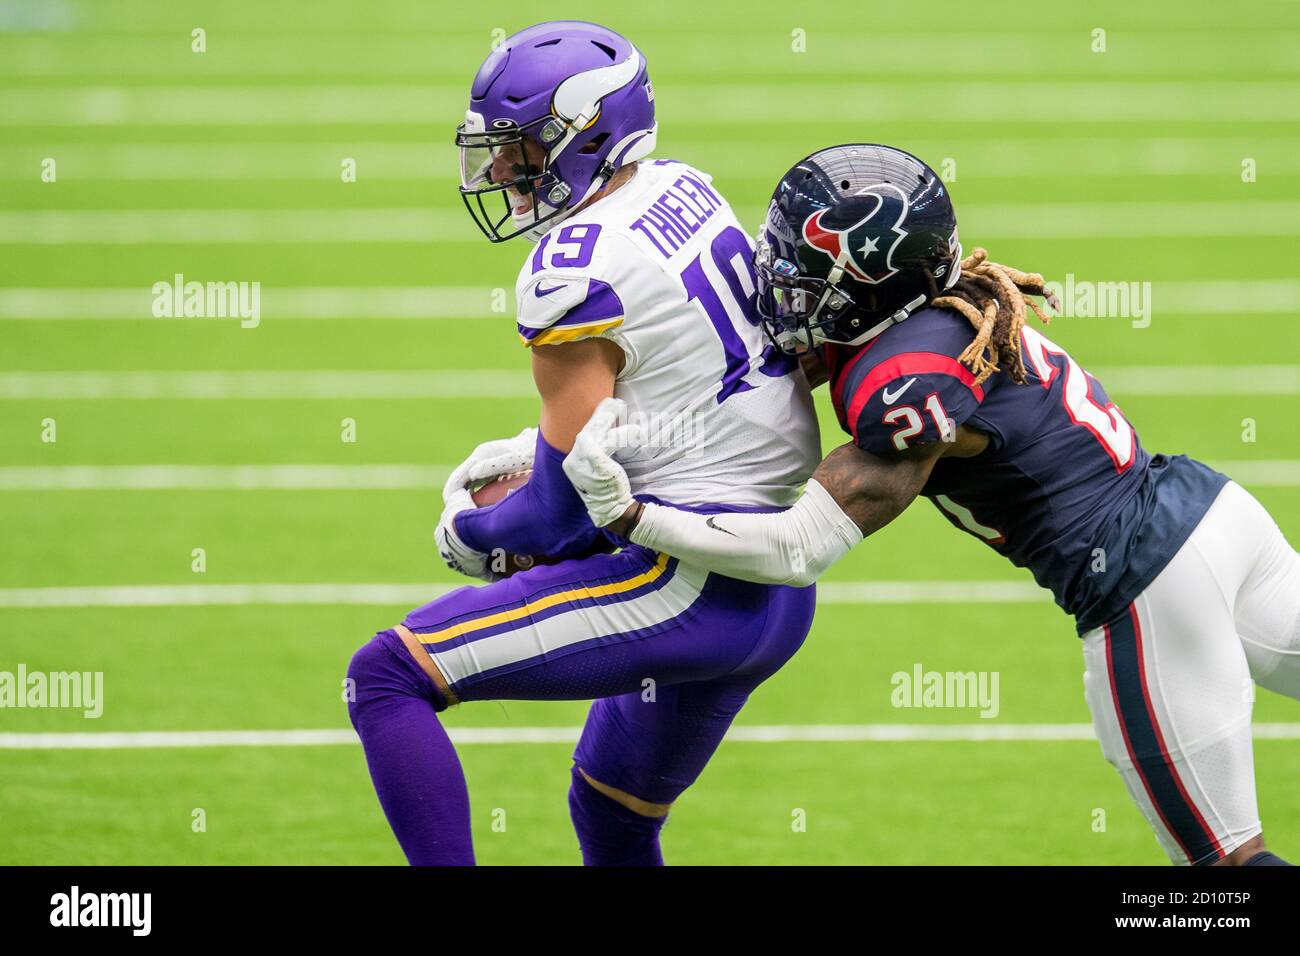 Houston, TX, USA. 4th Oct, 2020. Minnesota Vikings wide receiver Adam Thielen (19) makes a catch while being defended by Houston Texans cornerback Bradley Roby (21) during the 2nd quarter of an NFL football game between the Minnesota Vikings and the Houston Texans at NRG Stadium in Houston, TX. Trask Smith/CSM/Alamy Live News Stock Photo